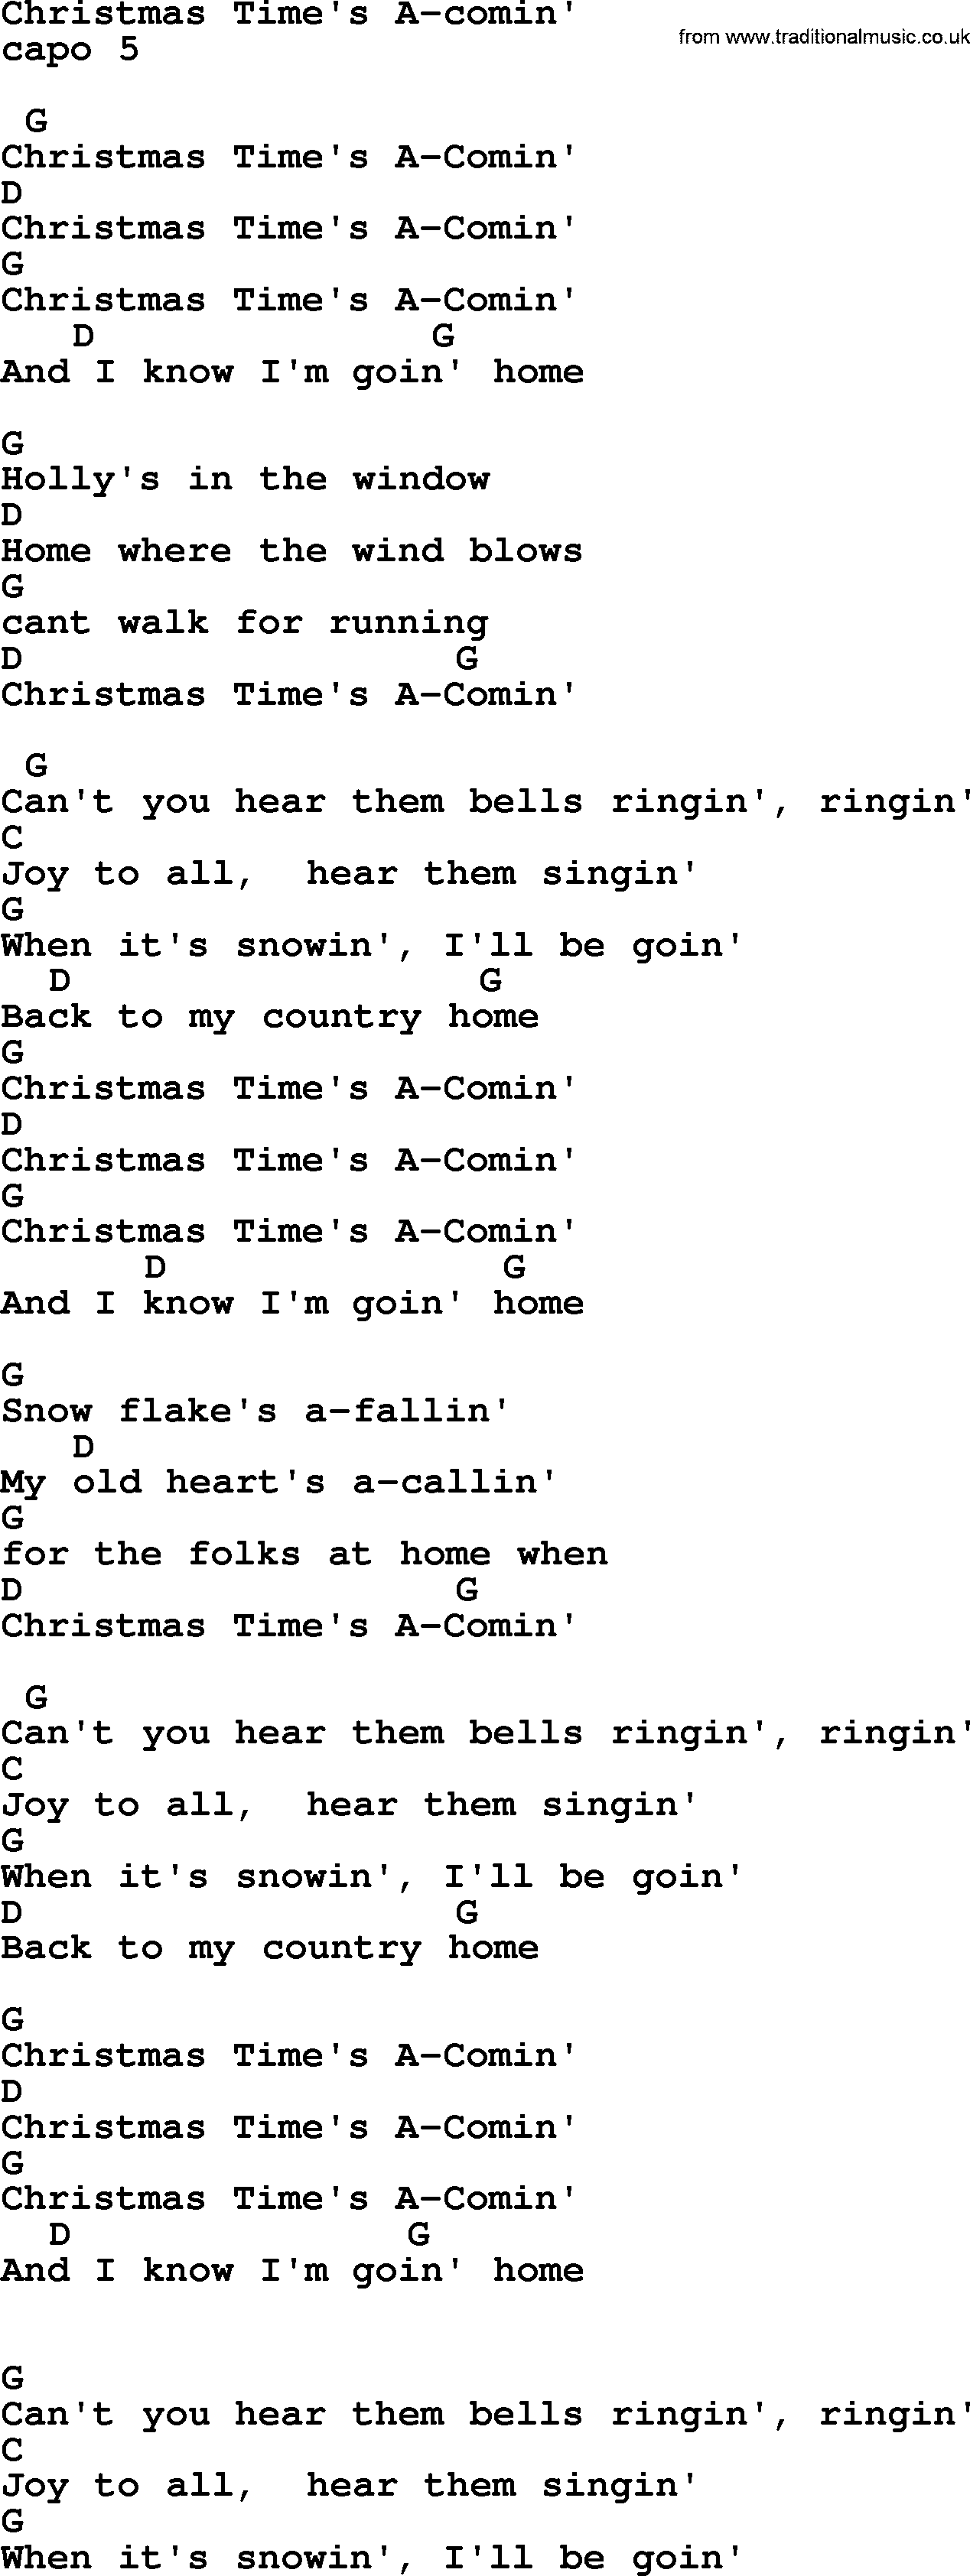 Bluegrass song: Christmas Time's A-Comin', lyrics and chords